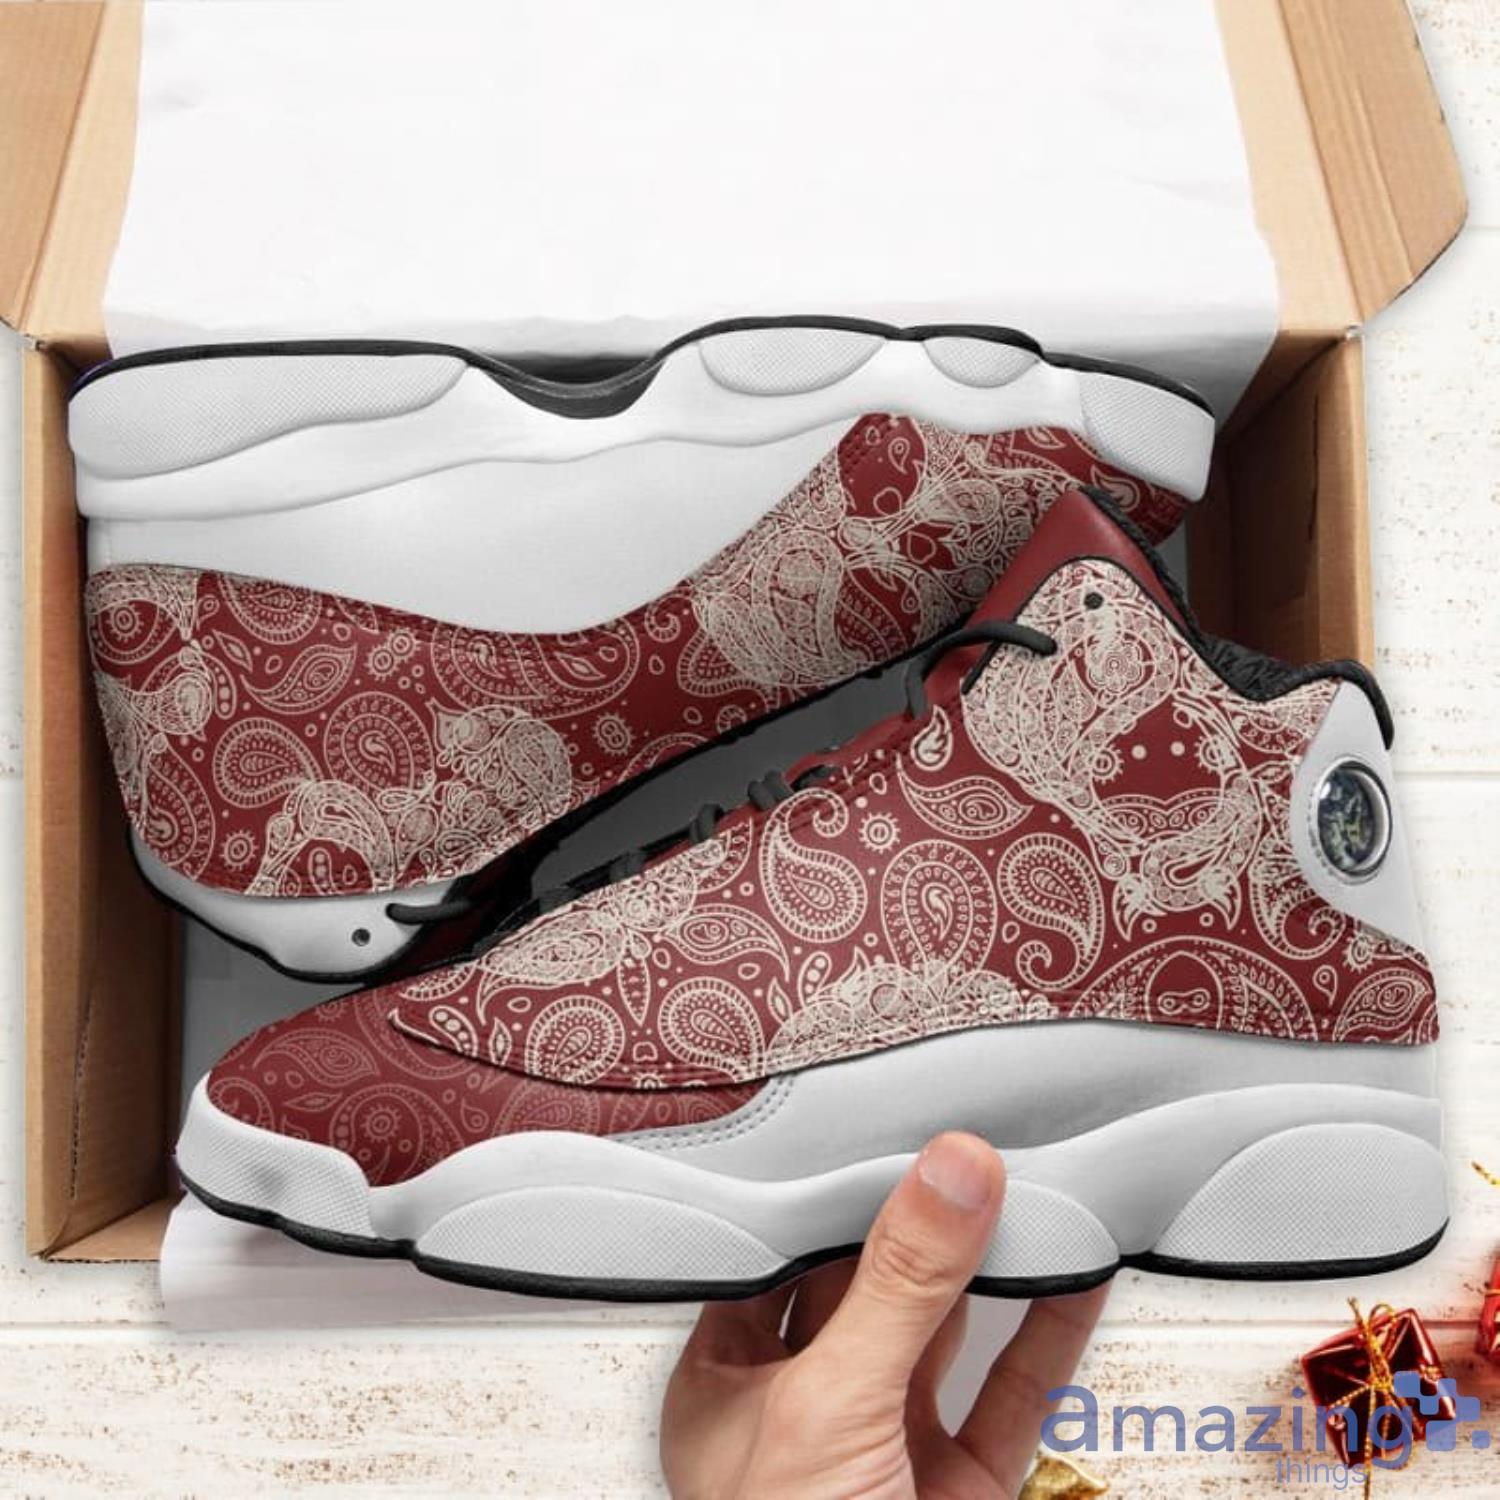 Air Jordan 13 Retro 'Chinese New Year' Shoes - Size 10.5  Width: M